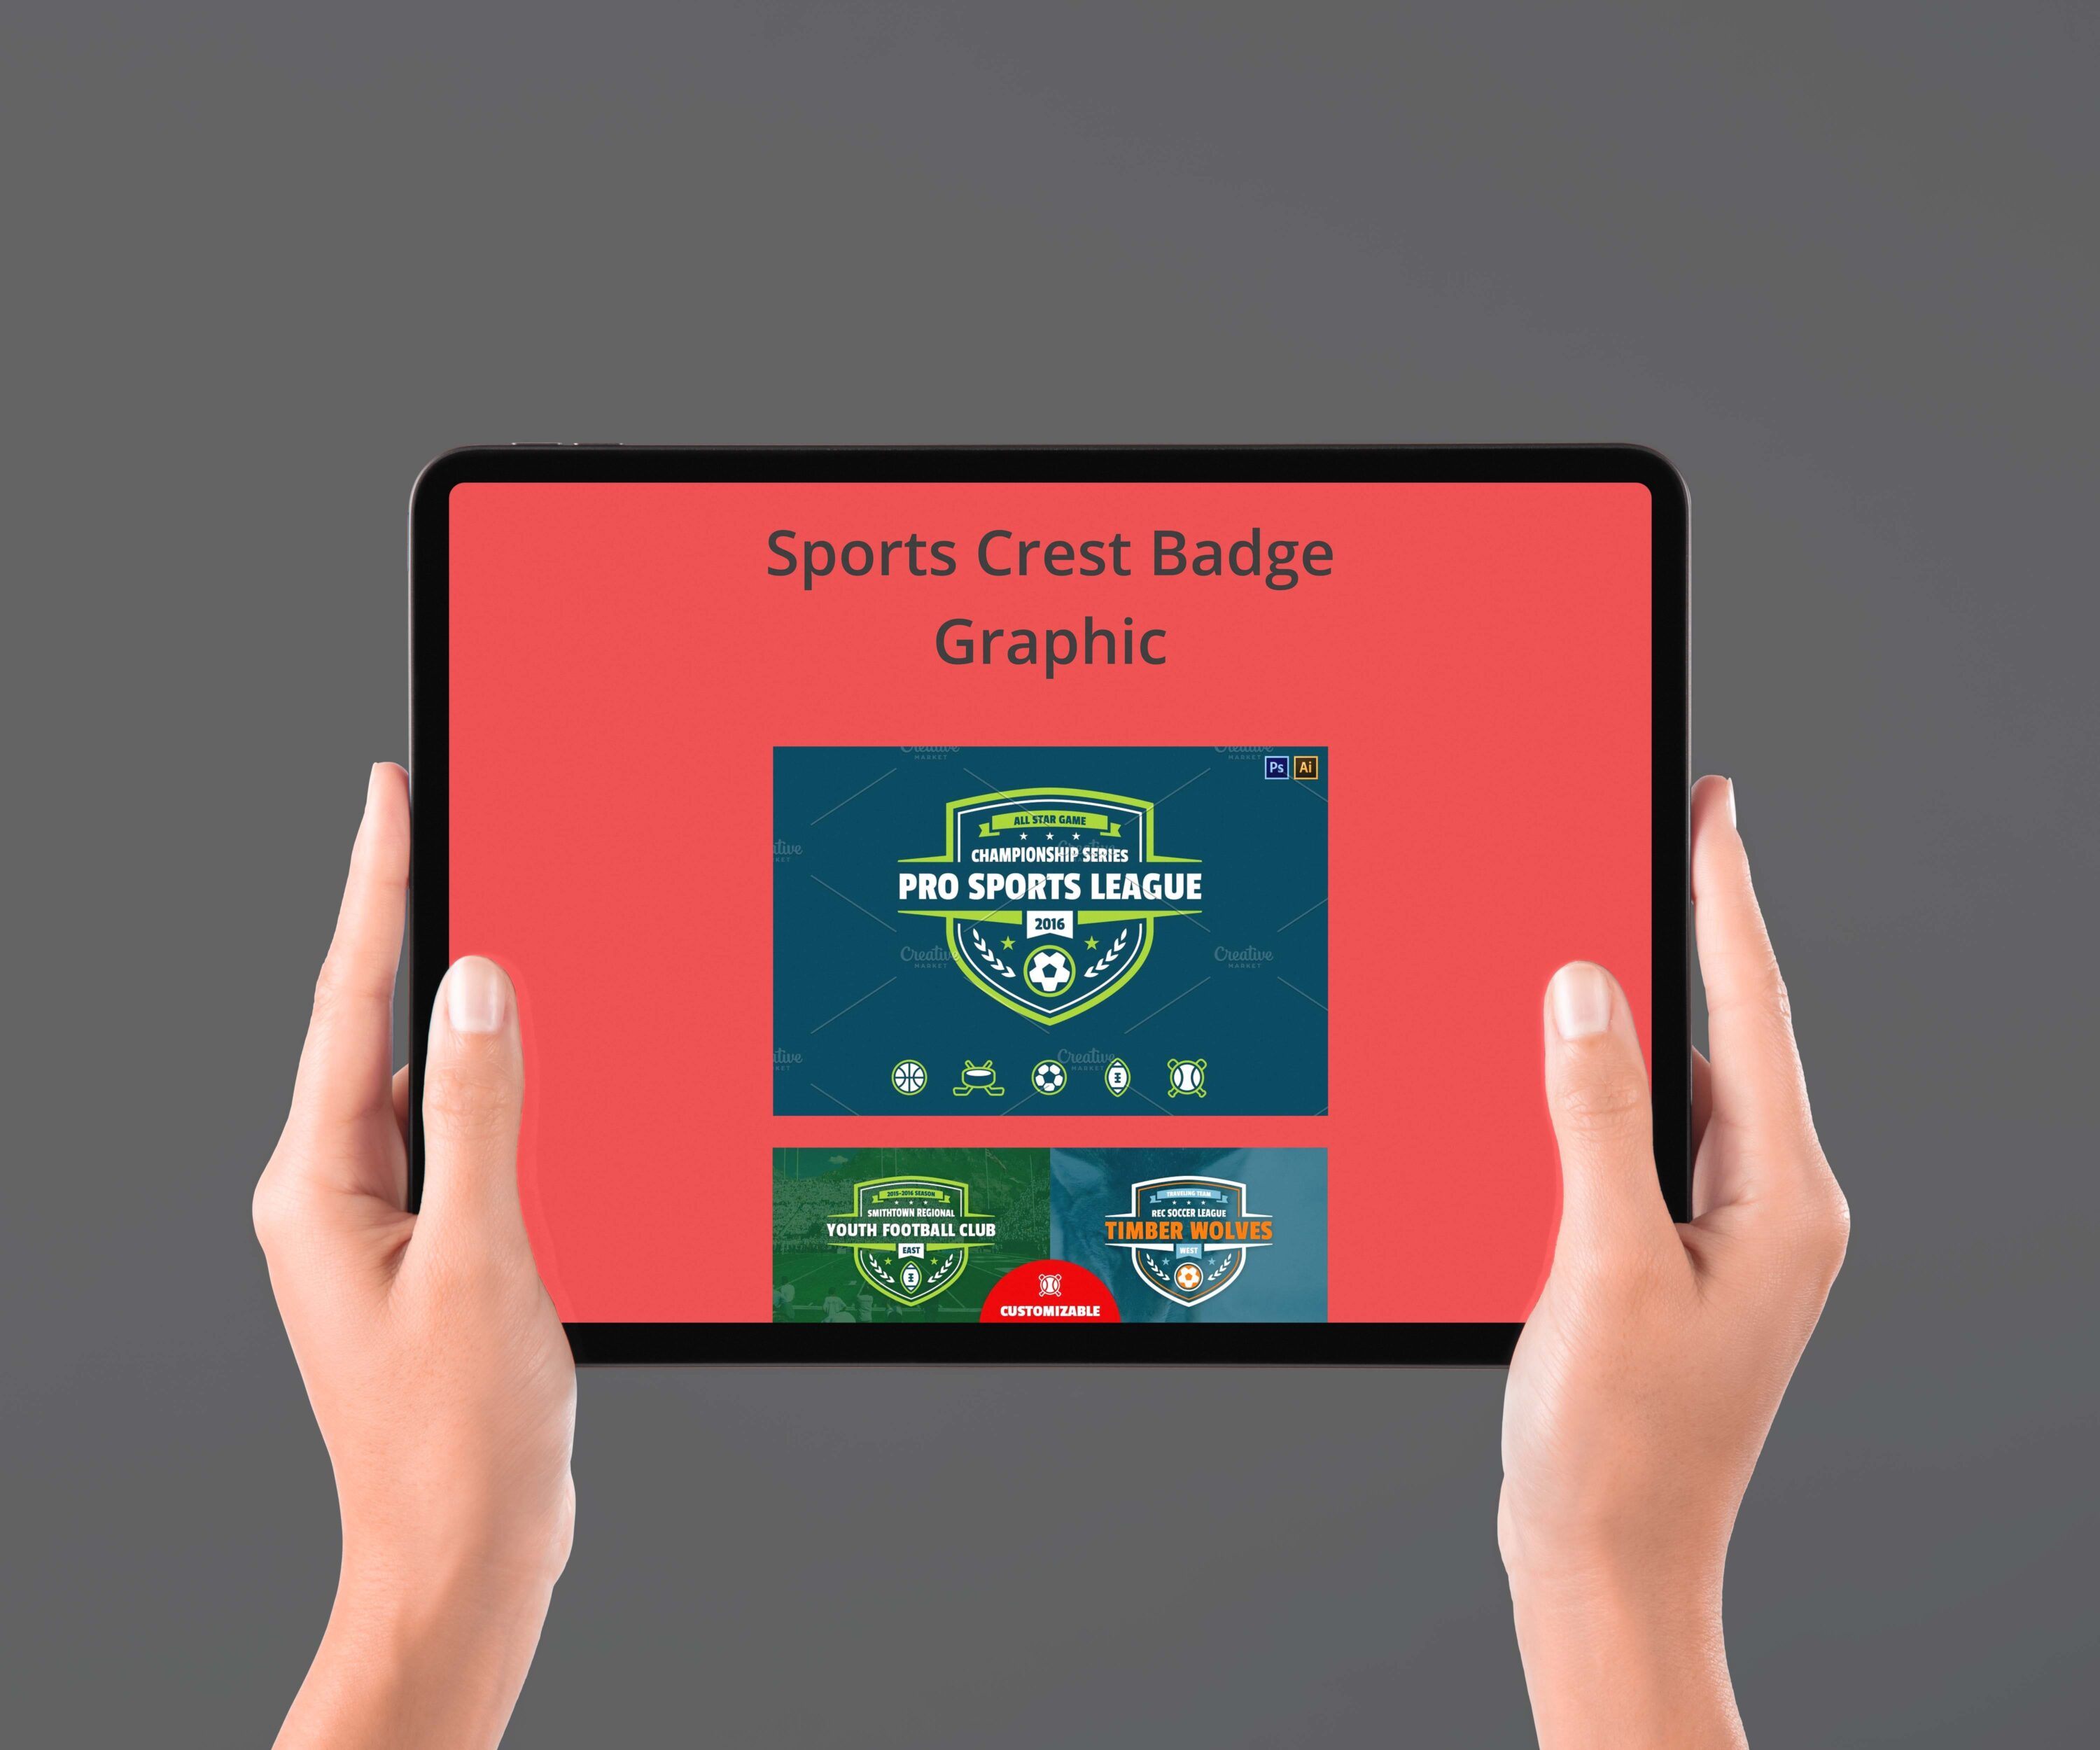 Sports Crest Badge Graphic - tablet.